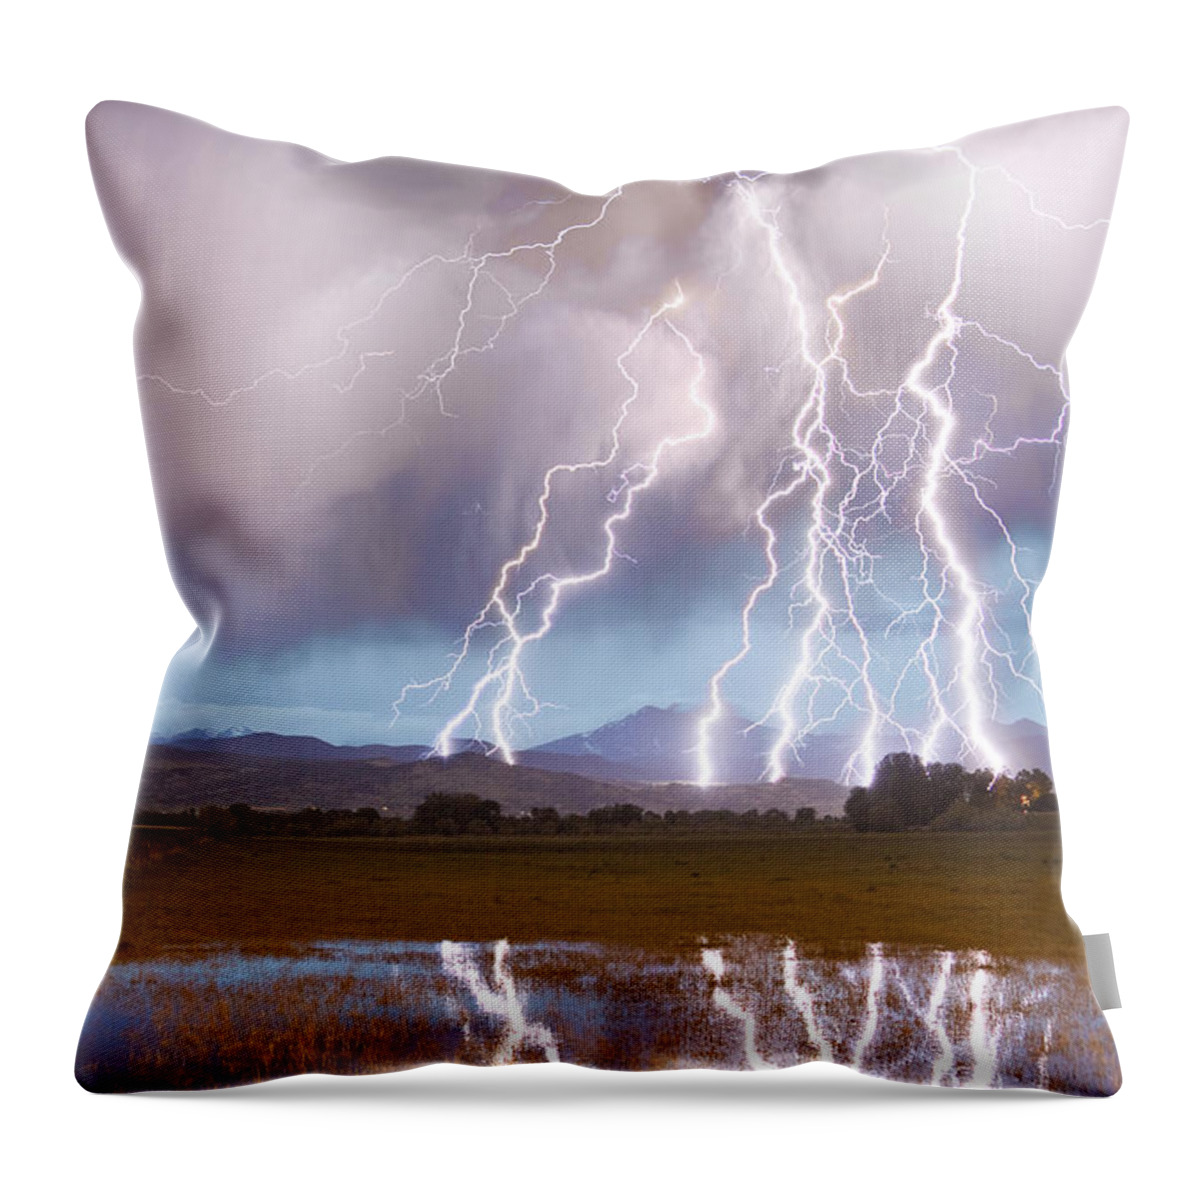 Awesome Throw Pillow featuring the photograph Lightning Striking Longs Peak Foothills 4 by James BO Insogna